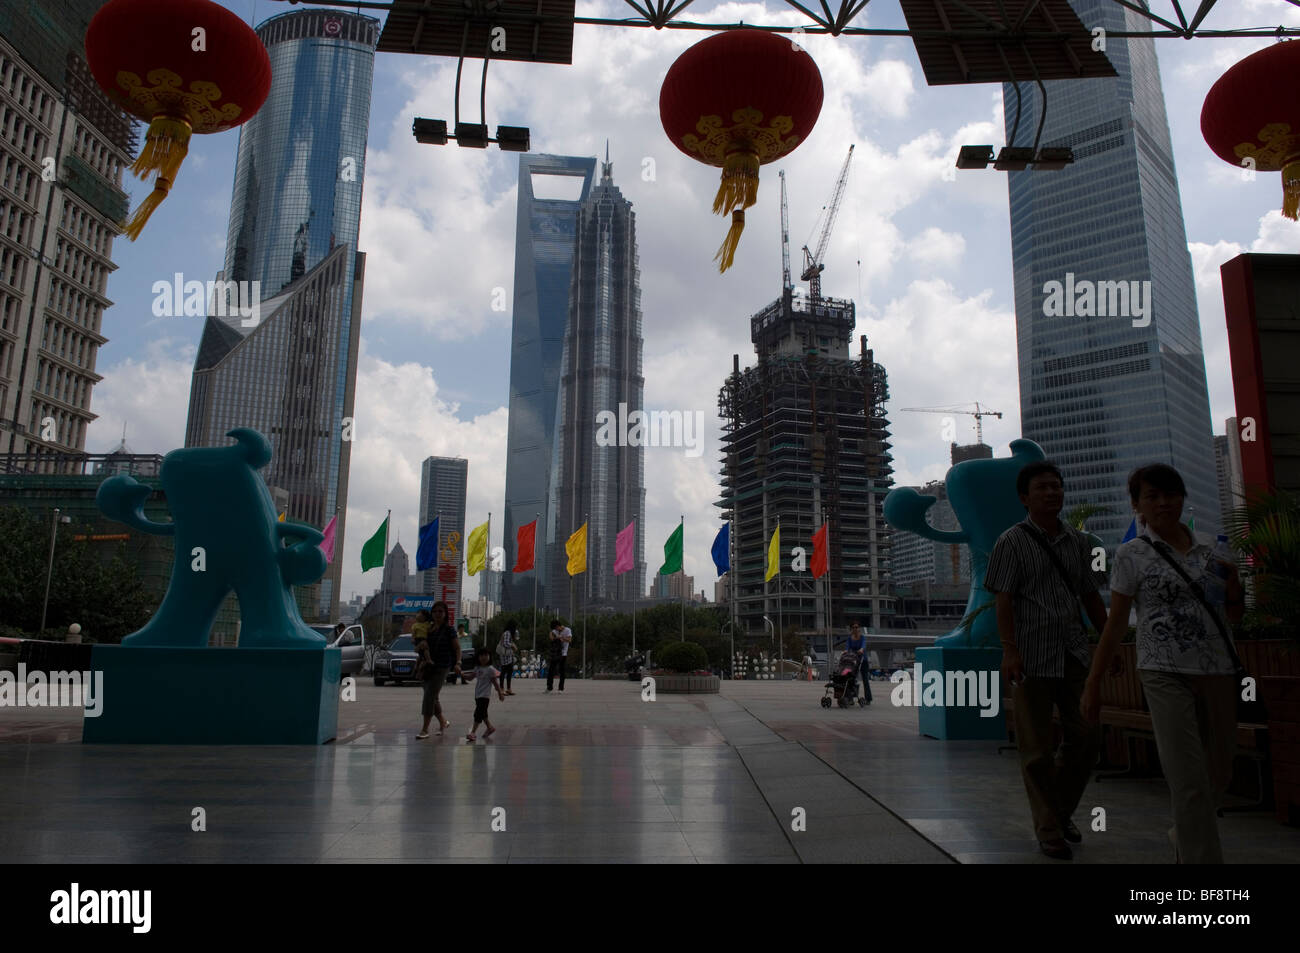 View on Pudong skyscrapers from entrance of Oriental Pearl Tower flanked by two mascots of EXPO 2010. Shanghai, China. Stock Photo